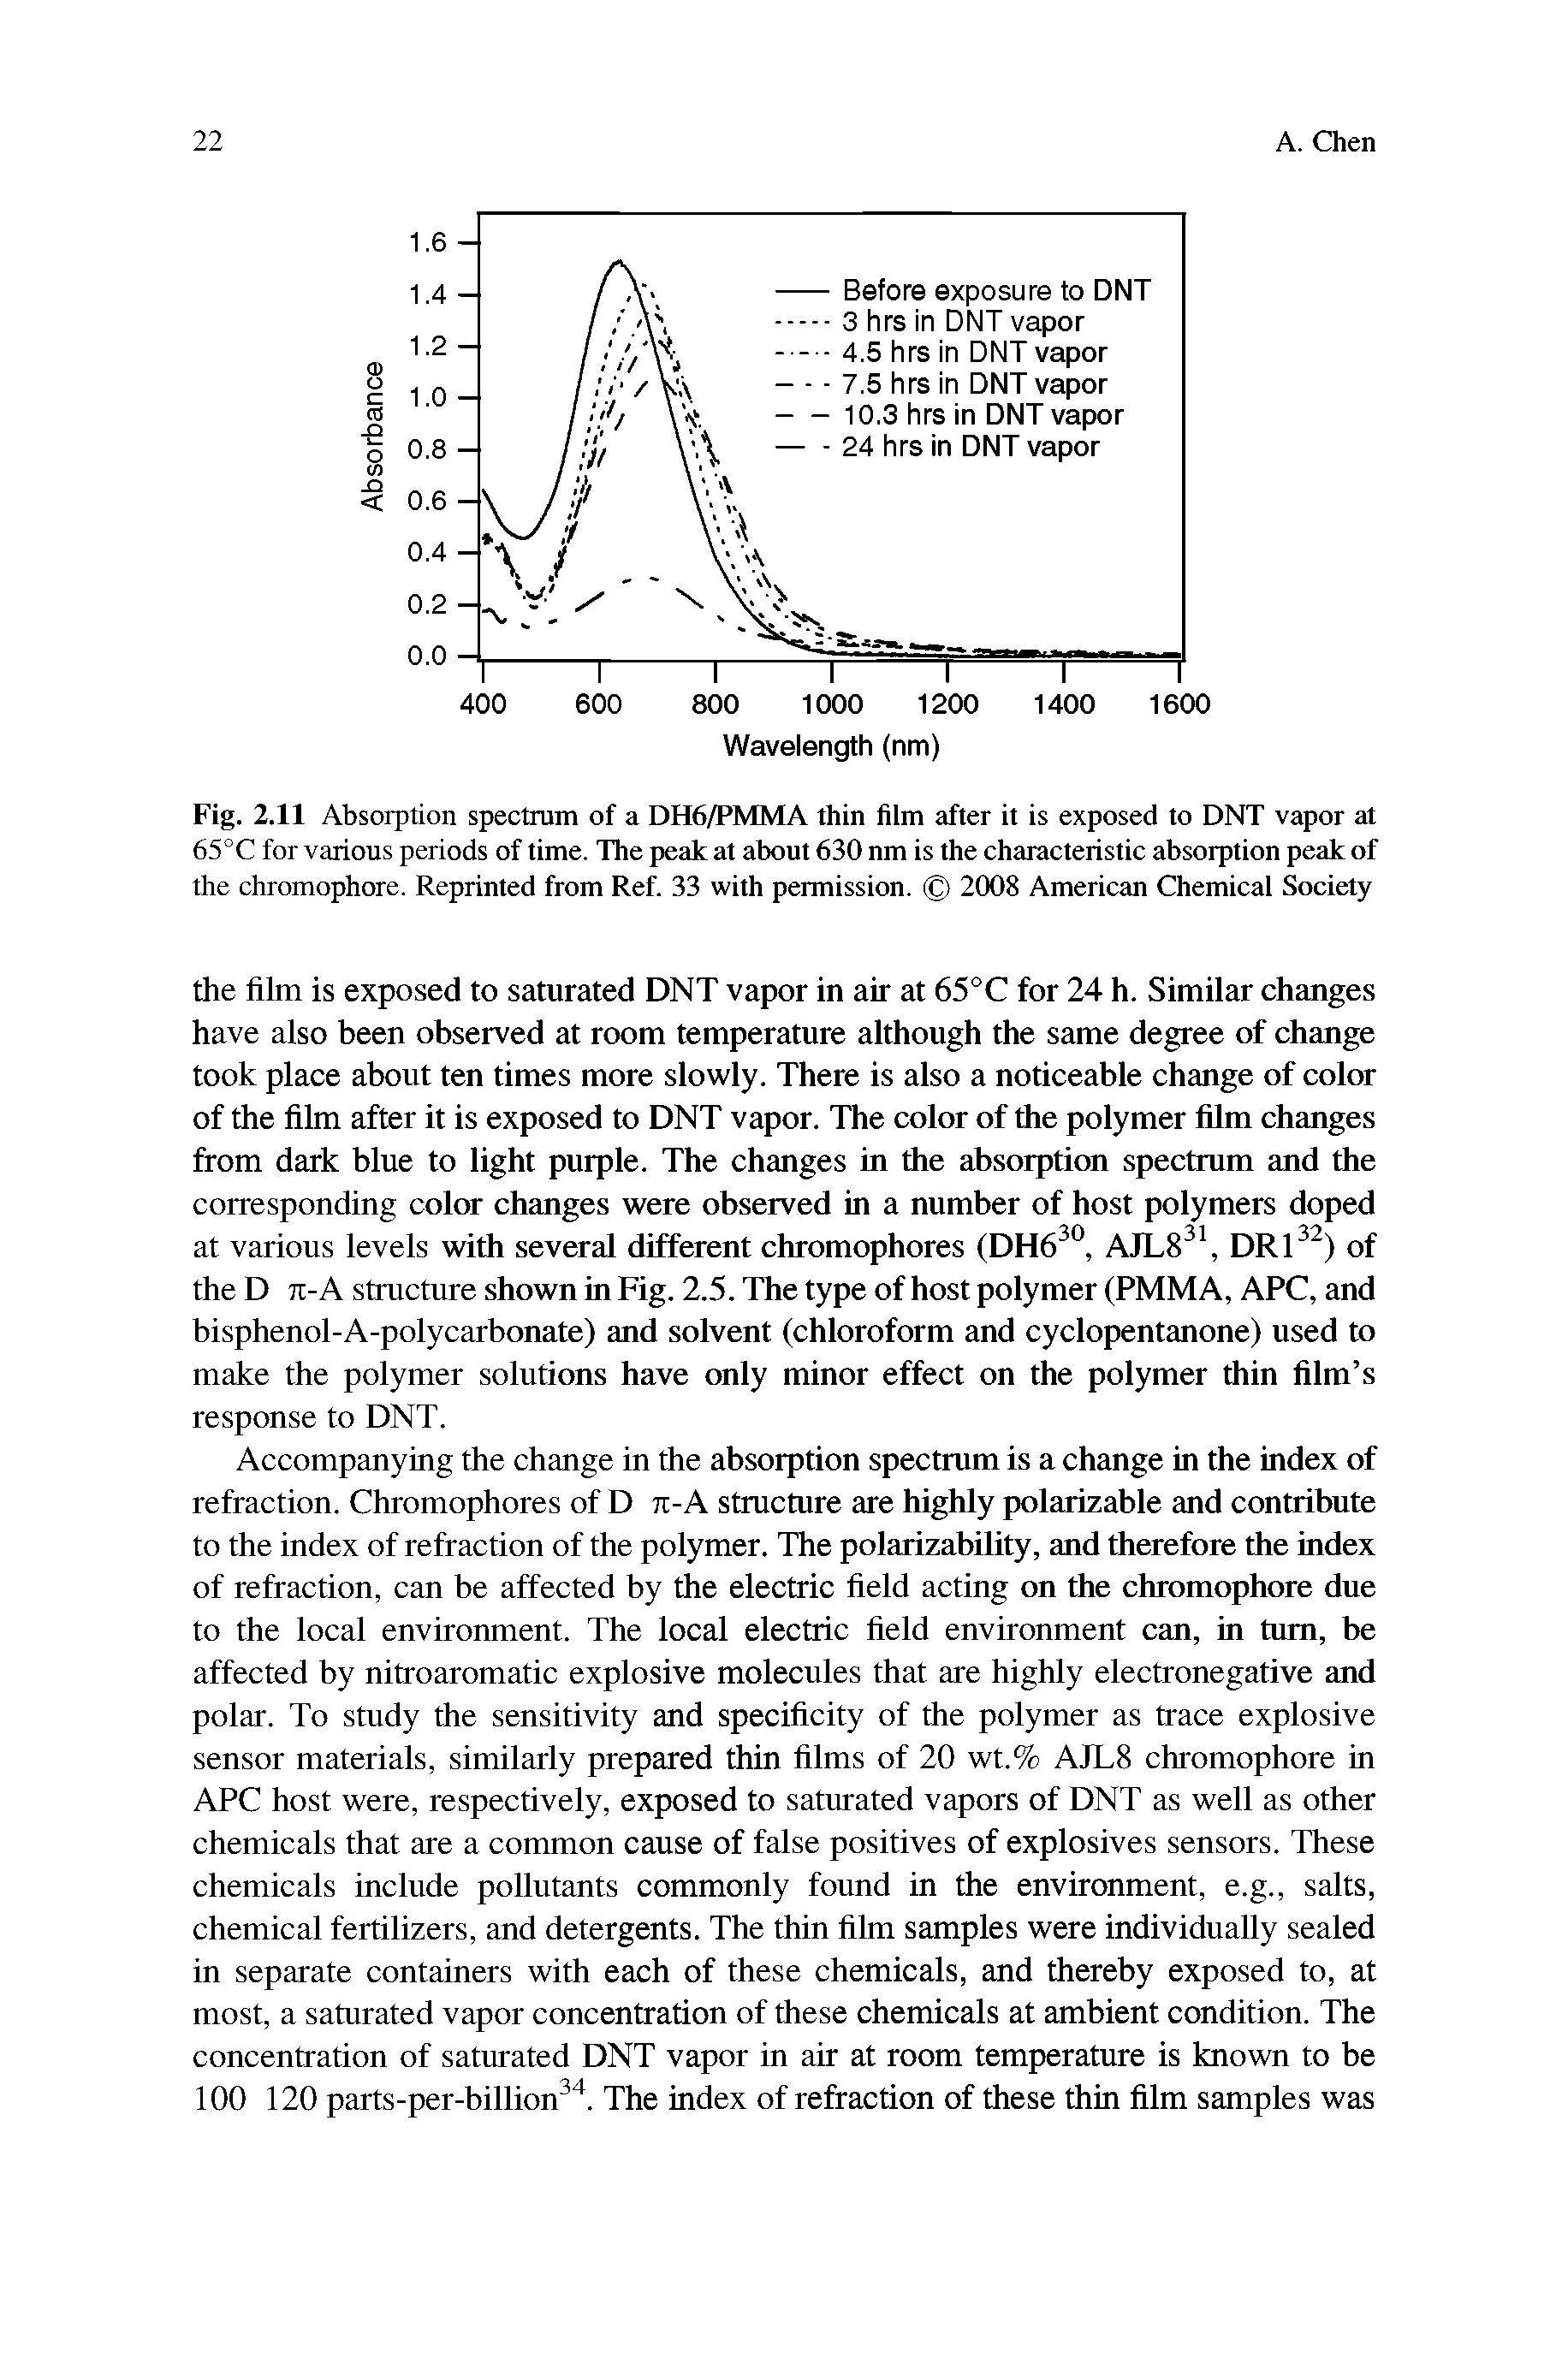 Fig. 2.11 Absorption spectrum of a DH6/PMMA thin film after it is exposed to DNT vapor at 65°C for various periods of time. The peak at about 630 nm is the characteristic absorption peak of the chromophore. Reprinted from Ref. 33 with permission. 2008 American Chemical Society...